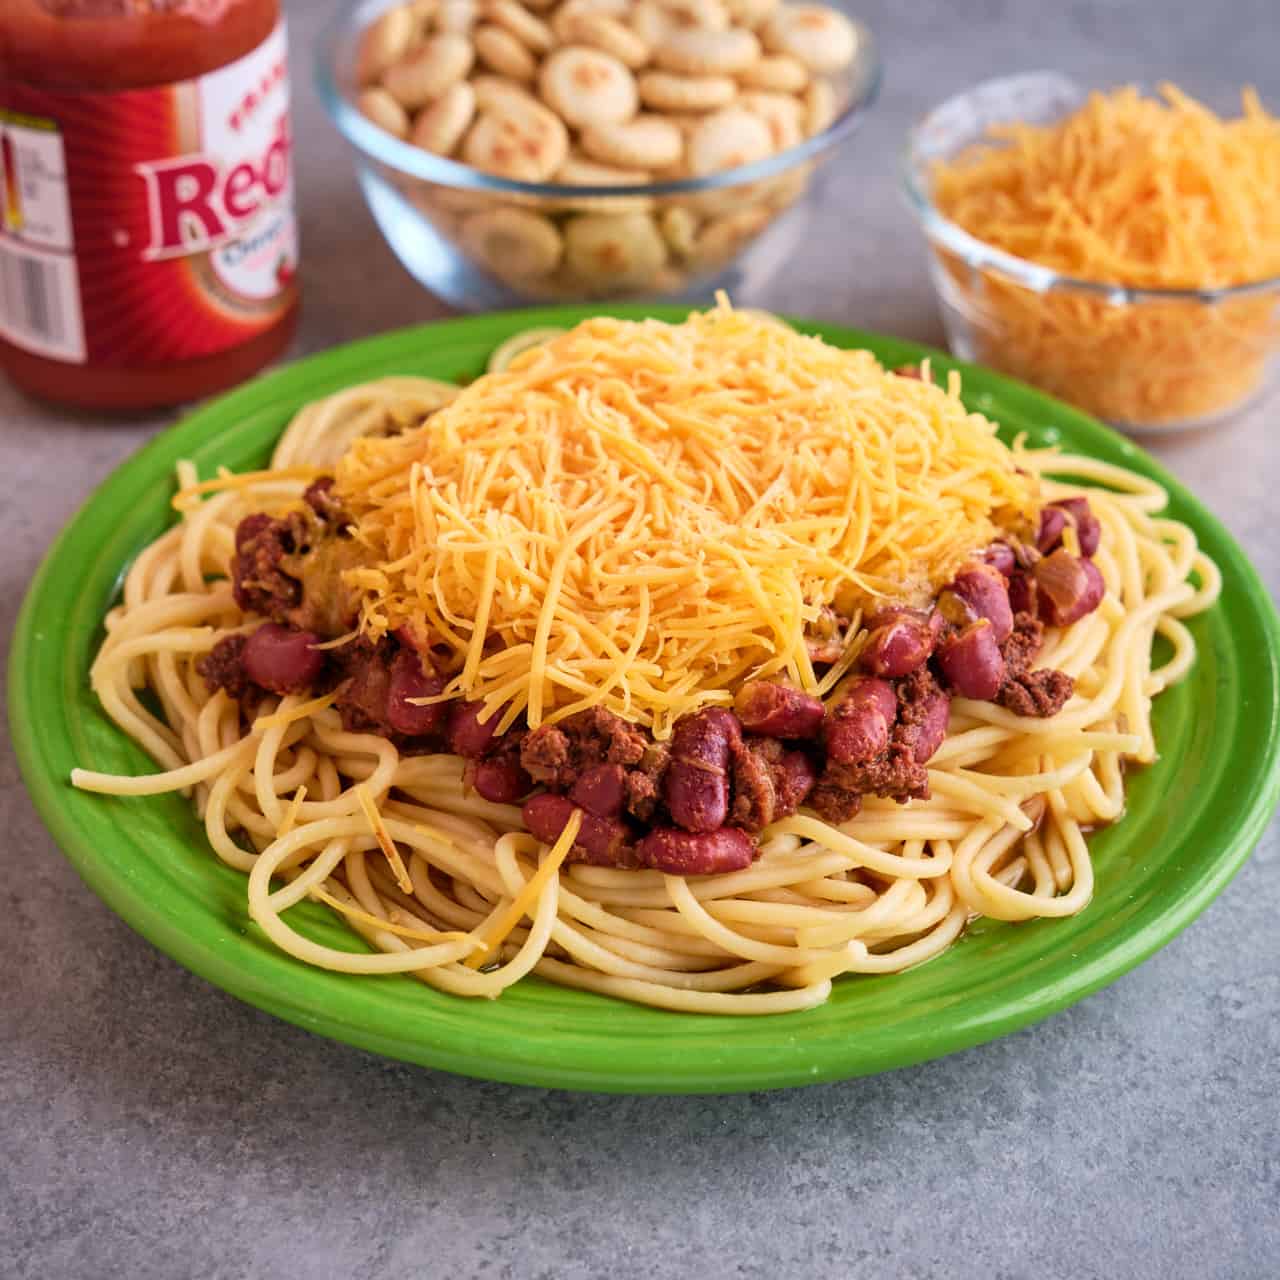 A plate of Cincinnati chili with cheese, oyster crackers, and hot sauce